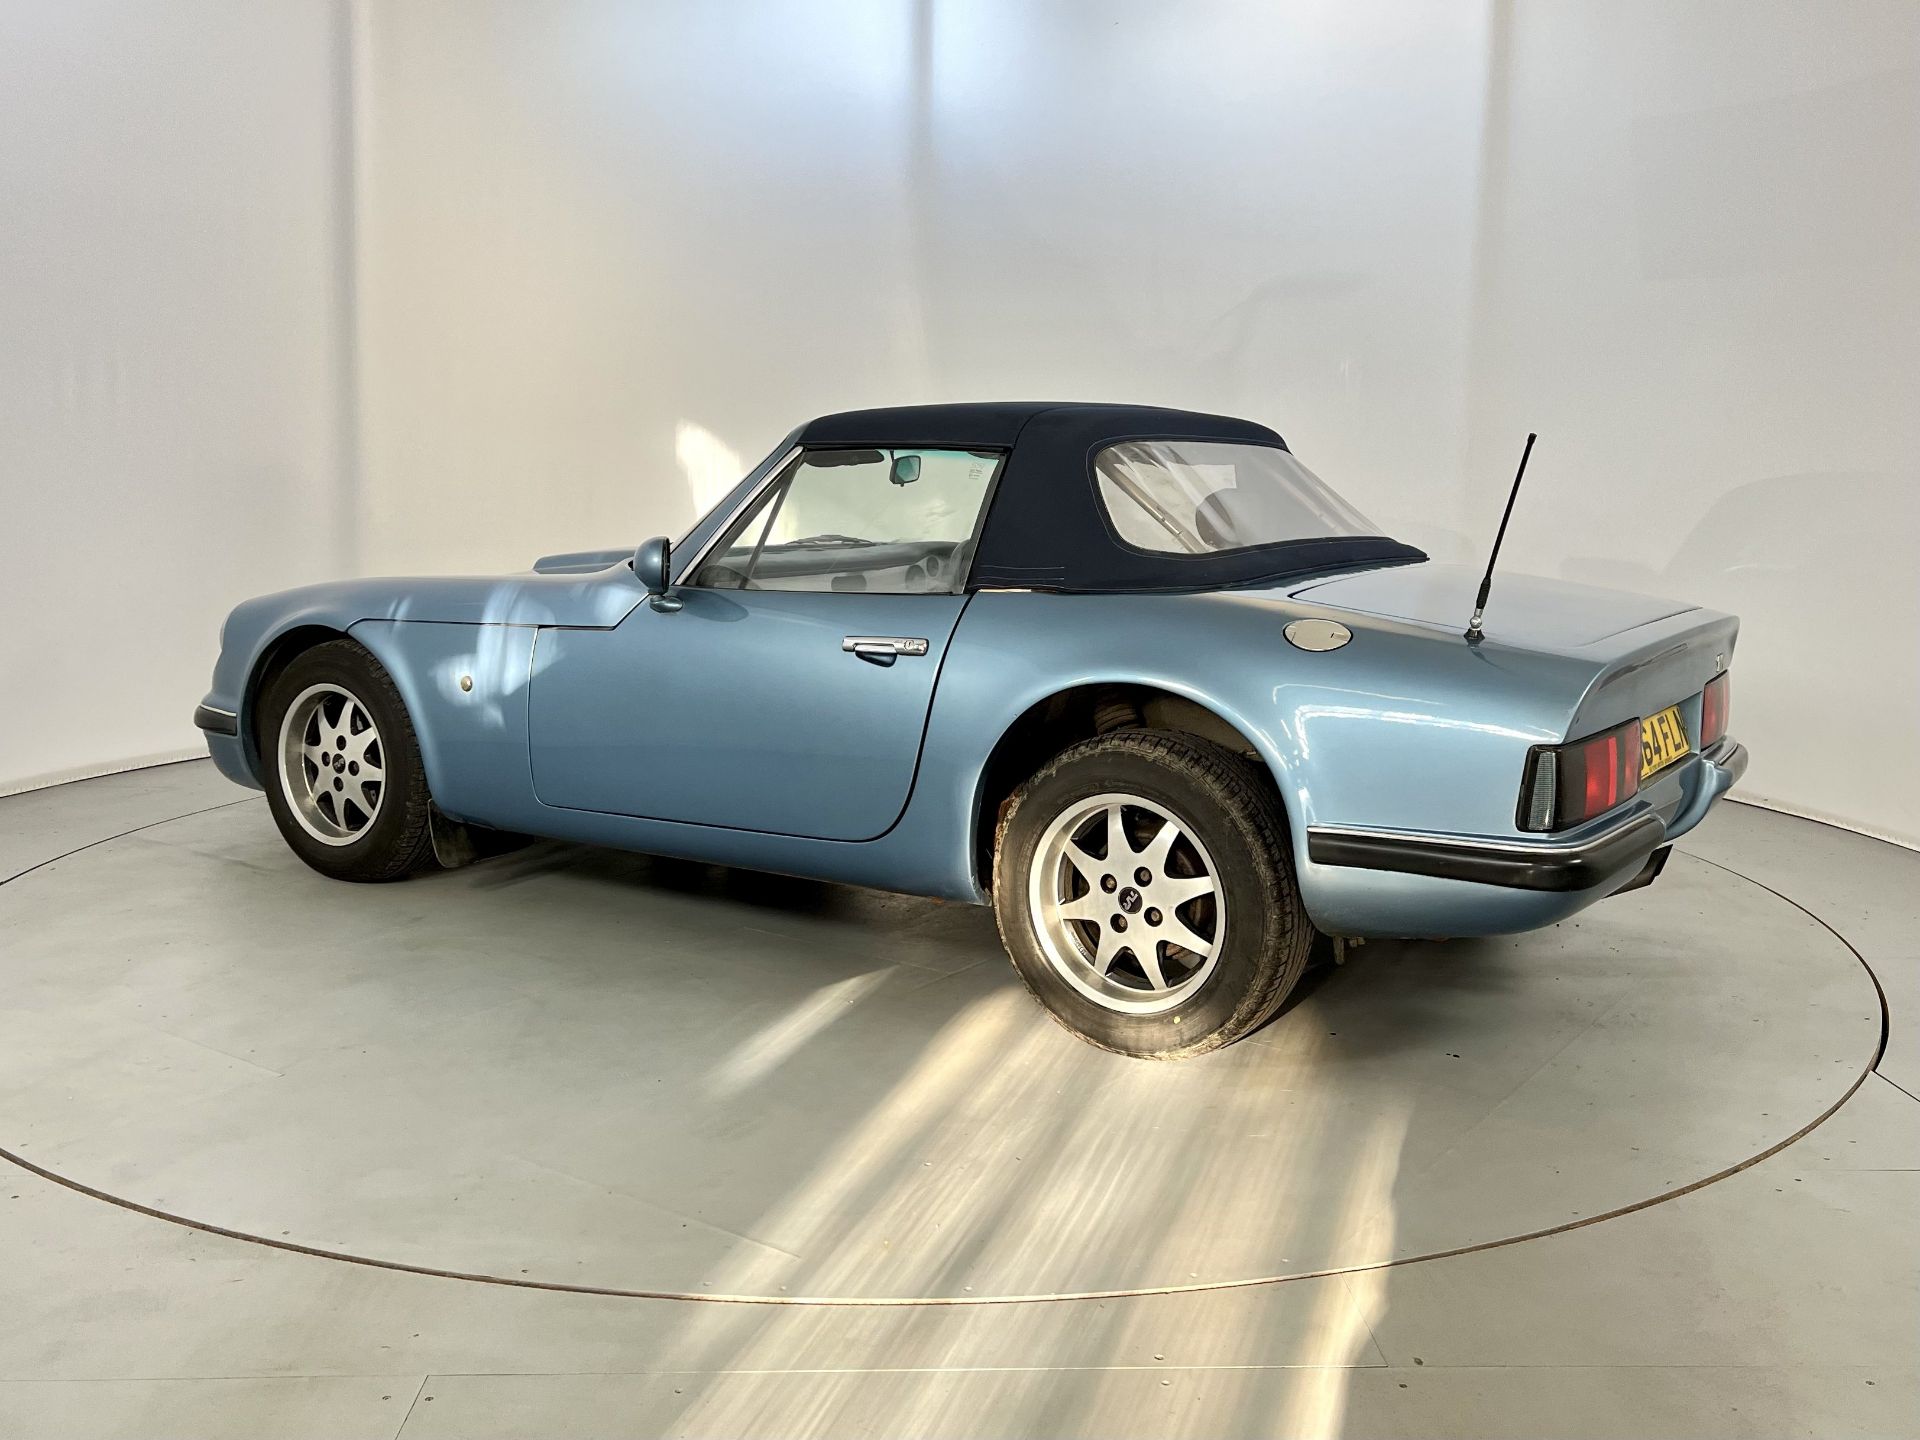 TVR S2 - Image 6 of 29